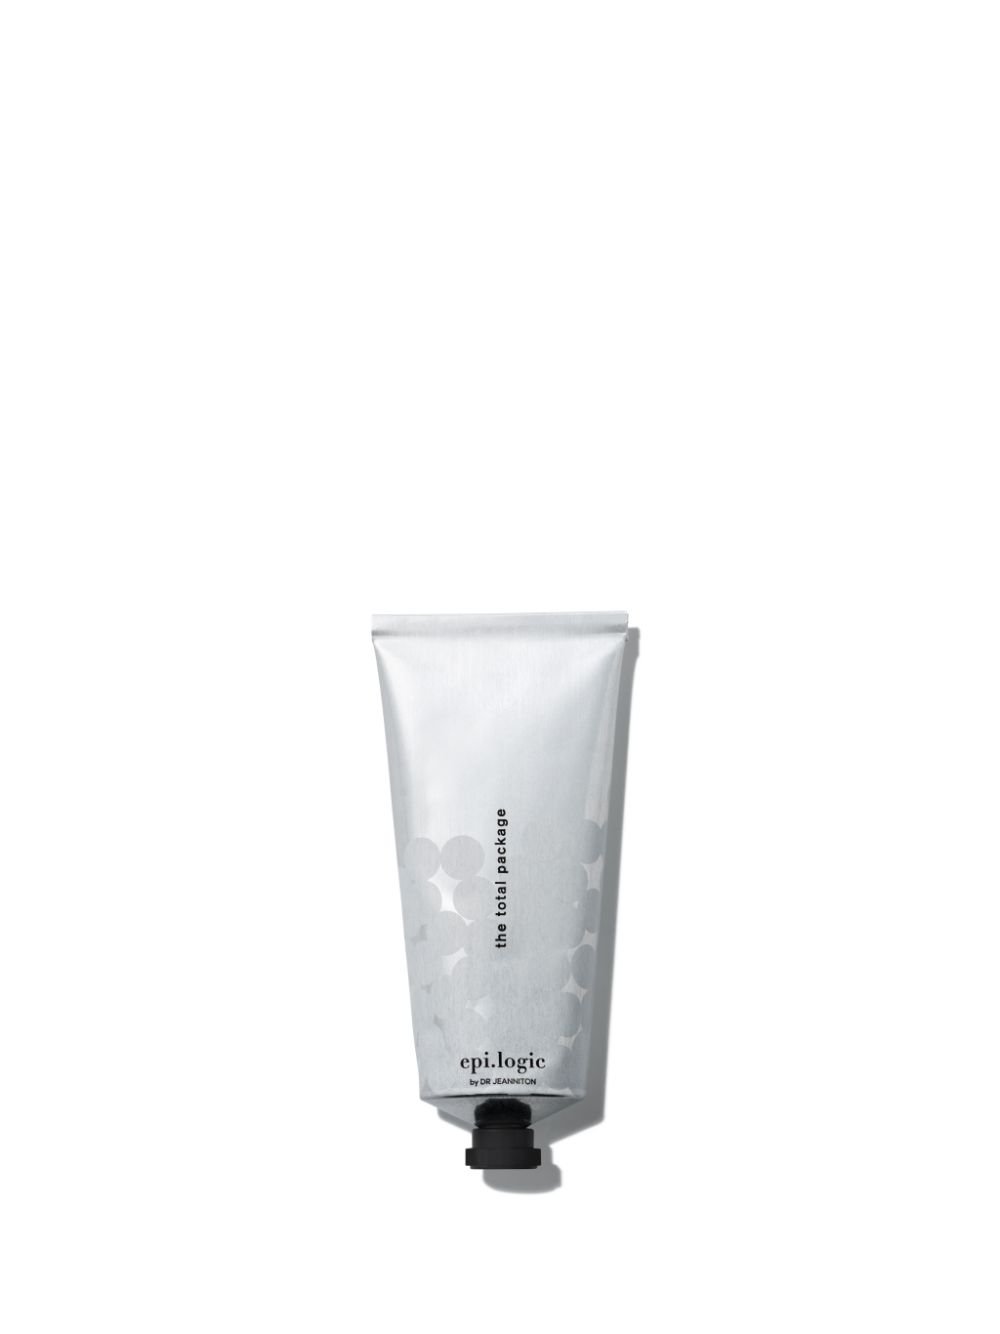 Image of <B>EPI.LOGIC</B><BR>THE TOTAL PACKAGE FORTIFYING PEPTIDE CREAM